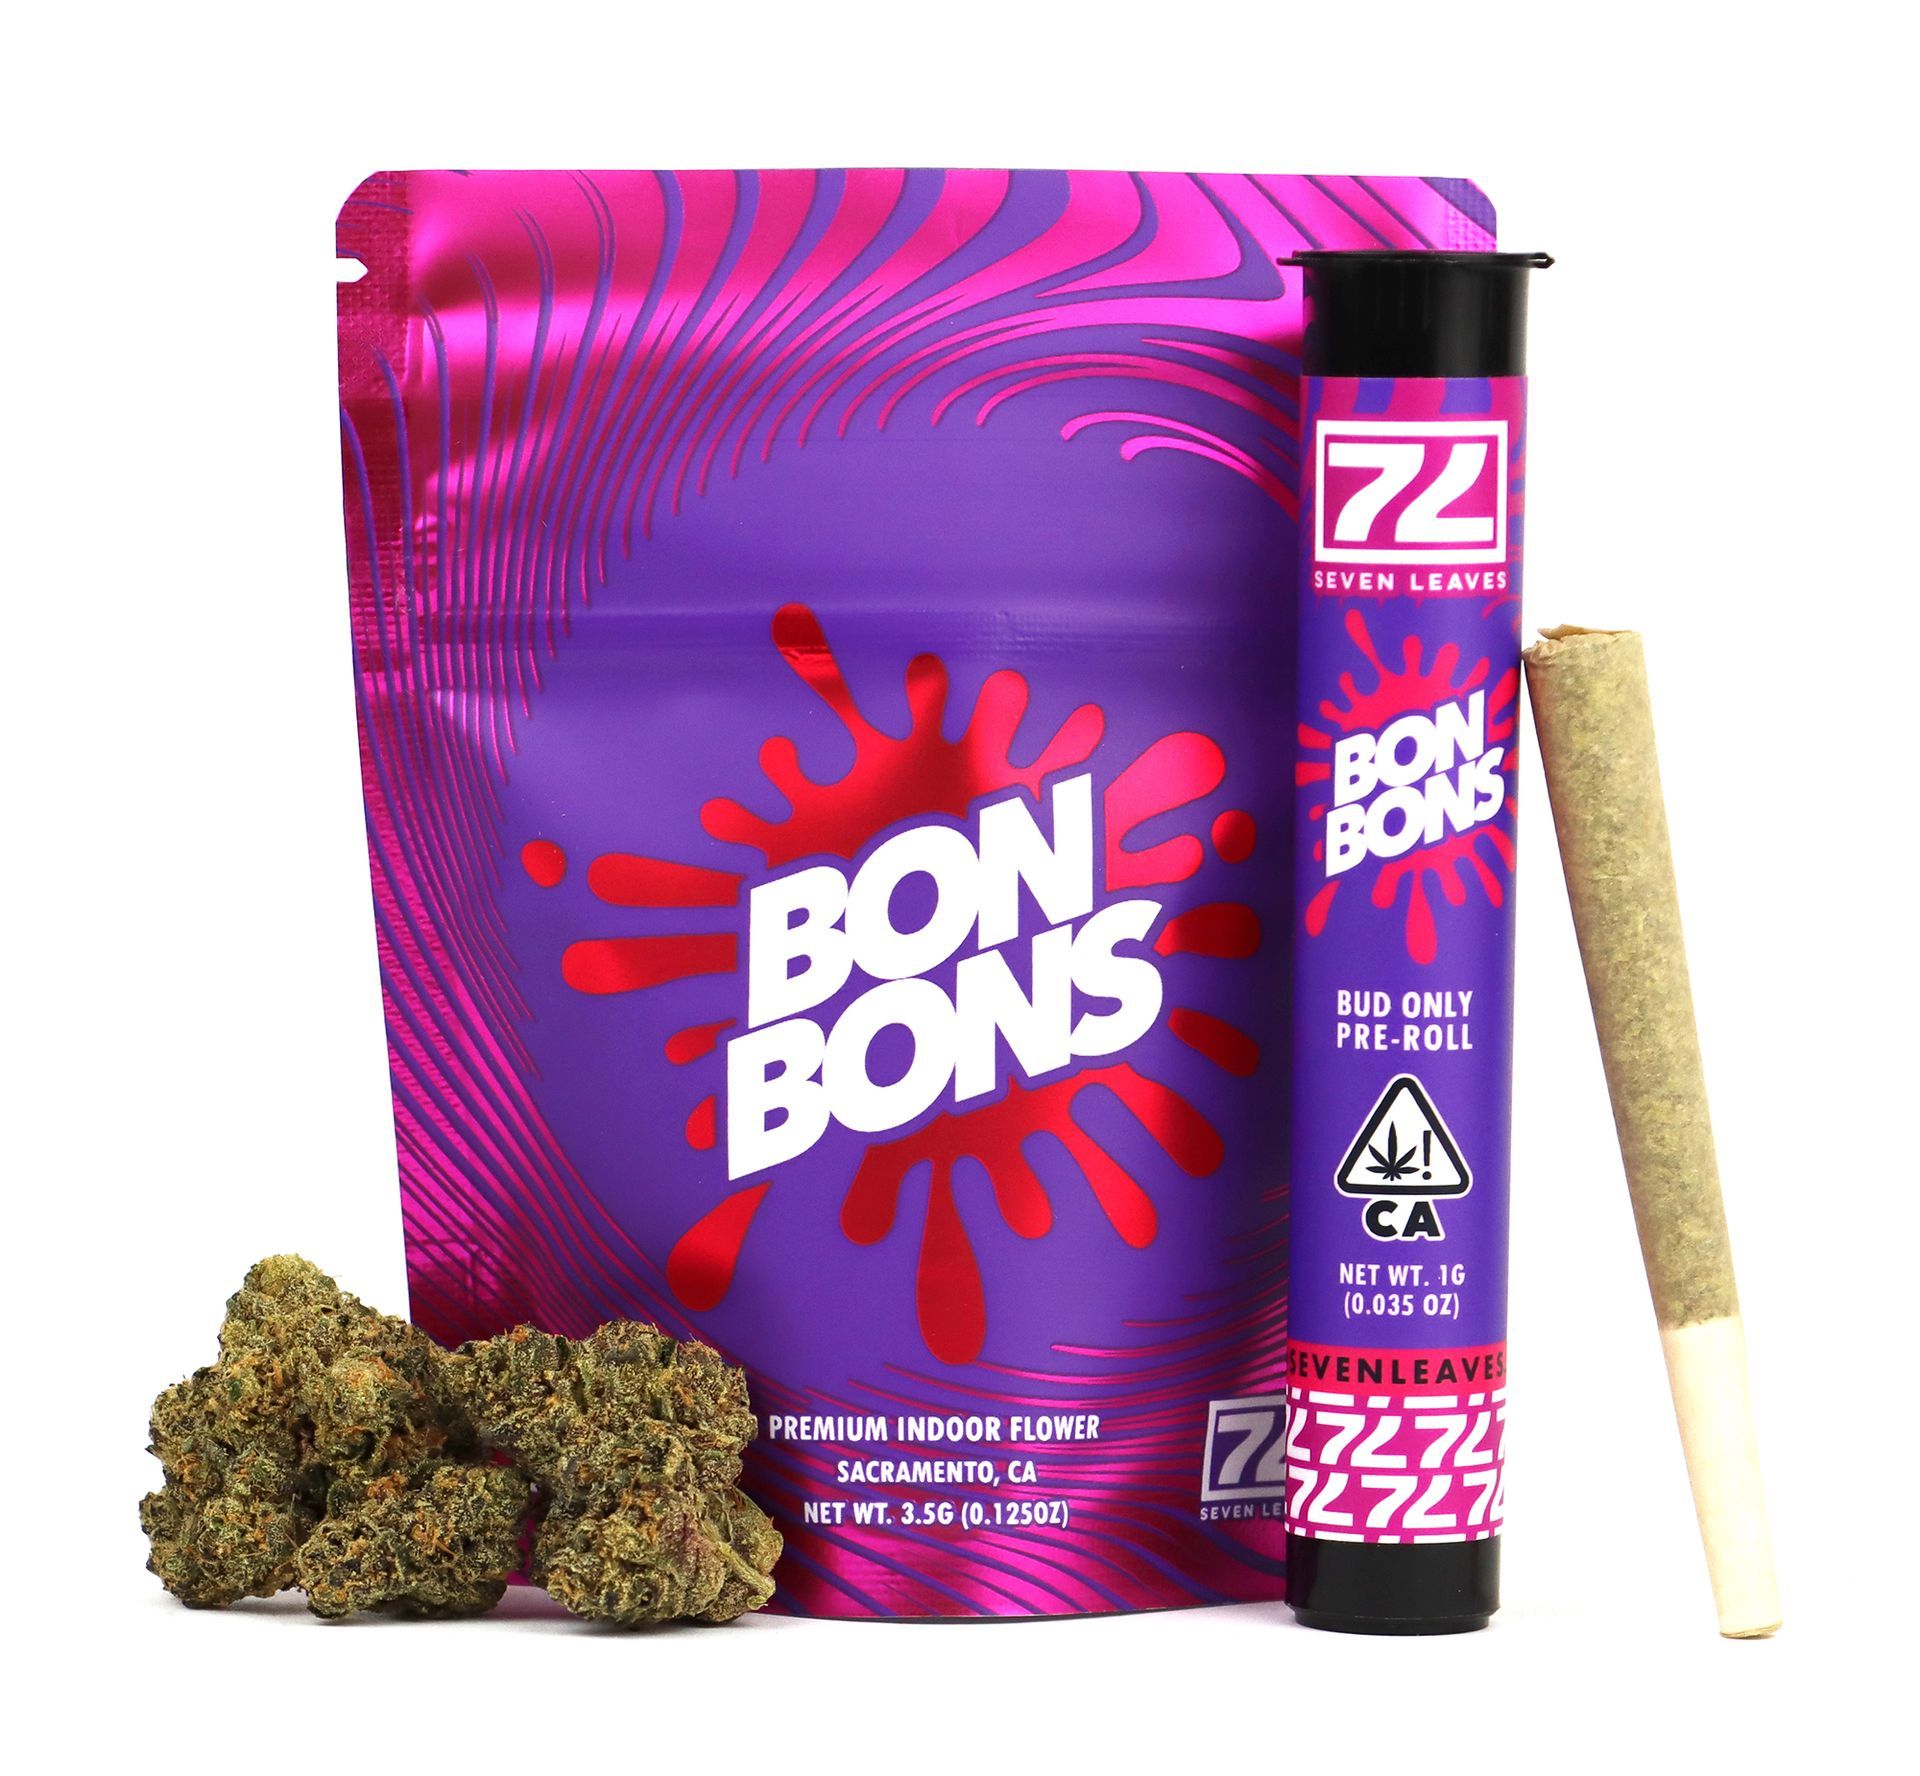 packaging spread of bon bons with pre roll on the side